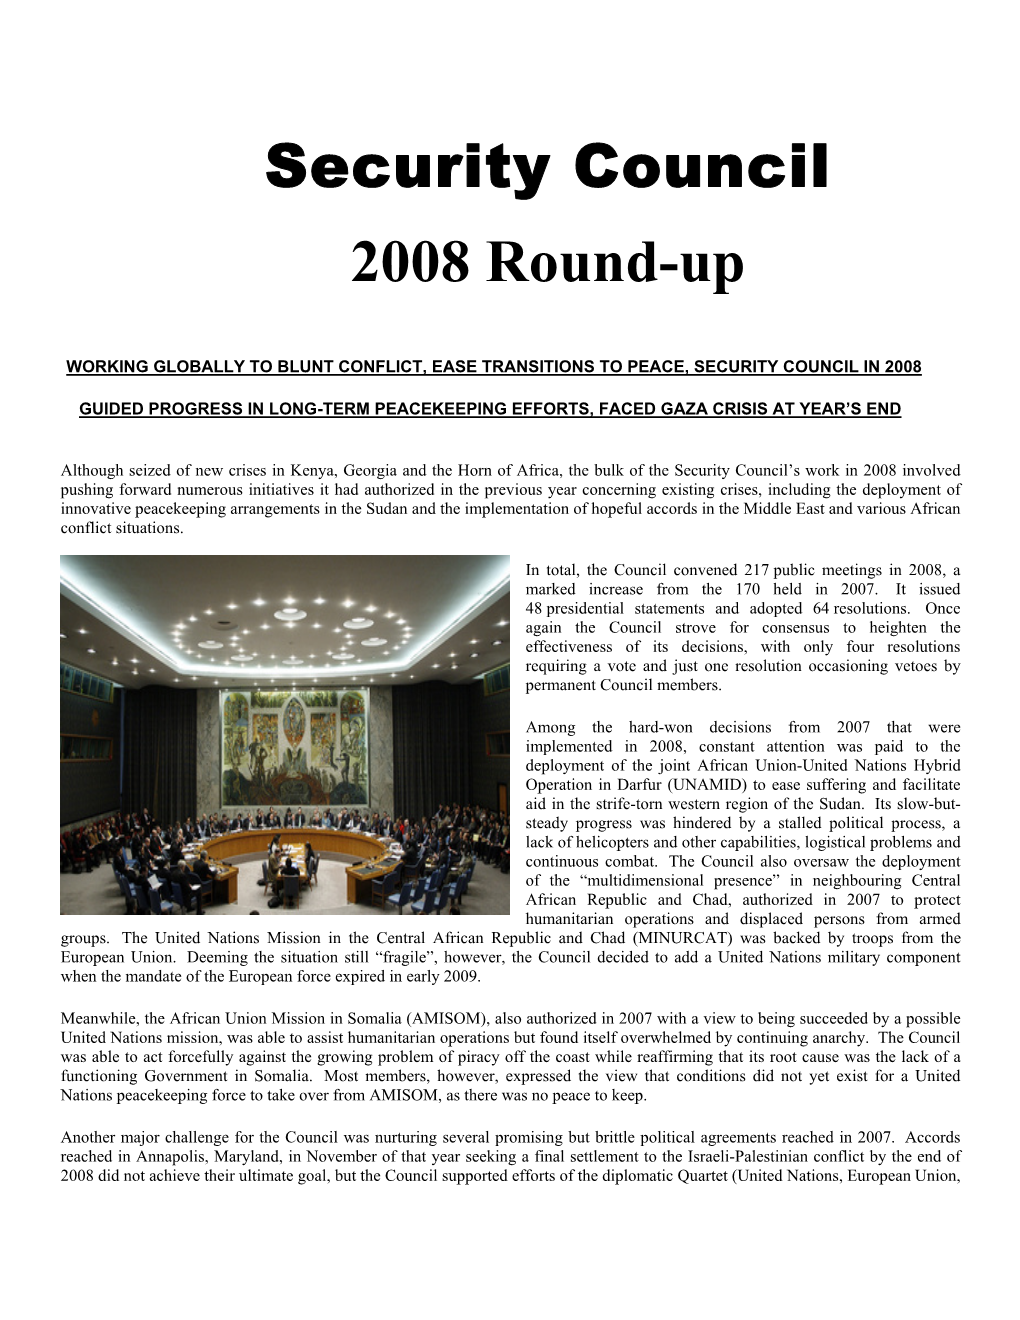 Security Council 2008 Round-Up